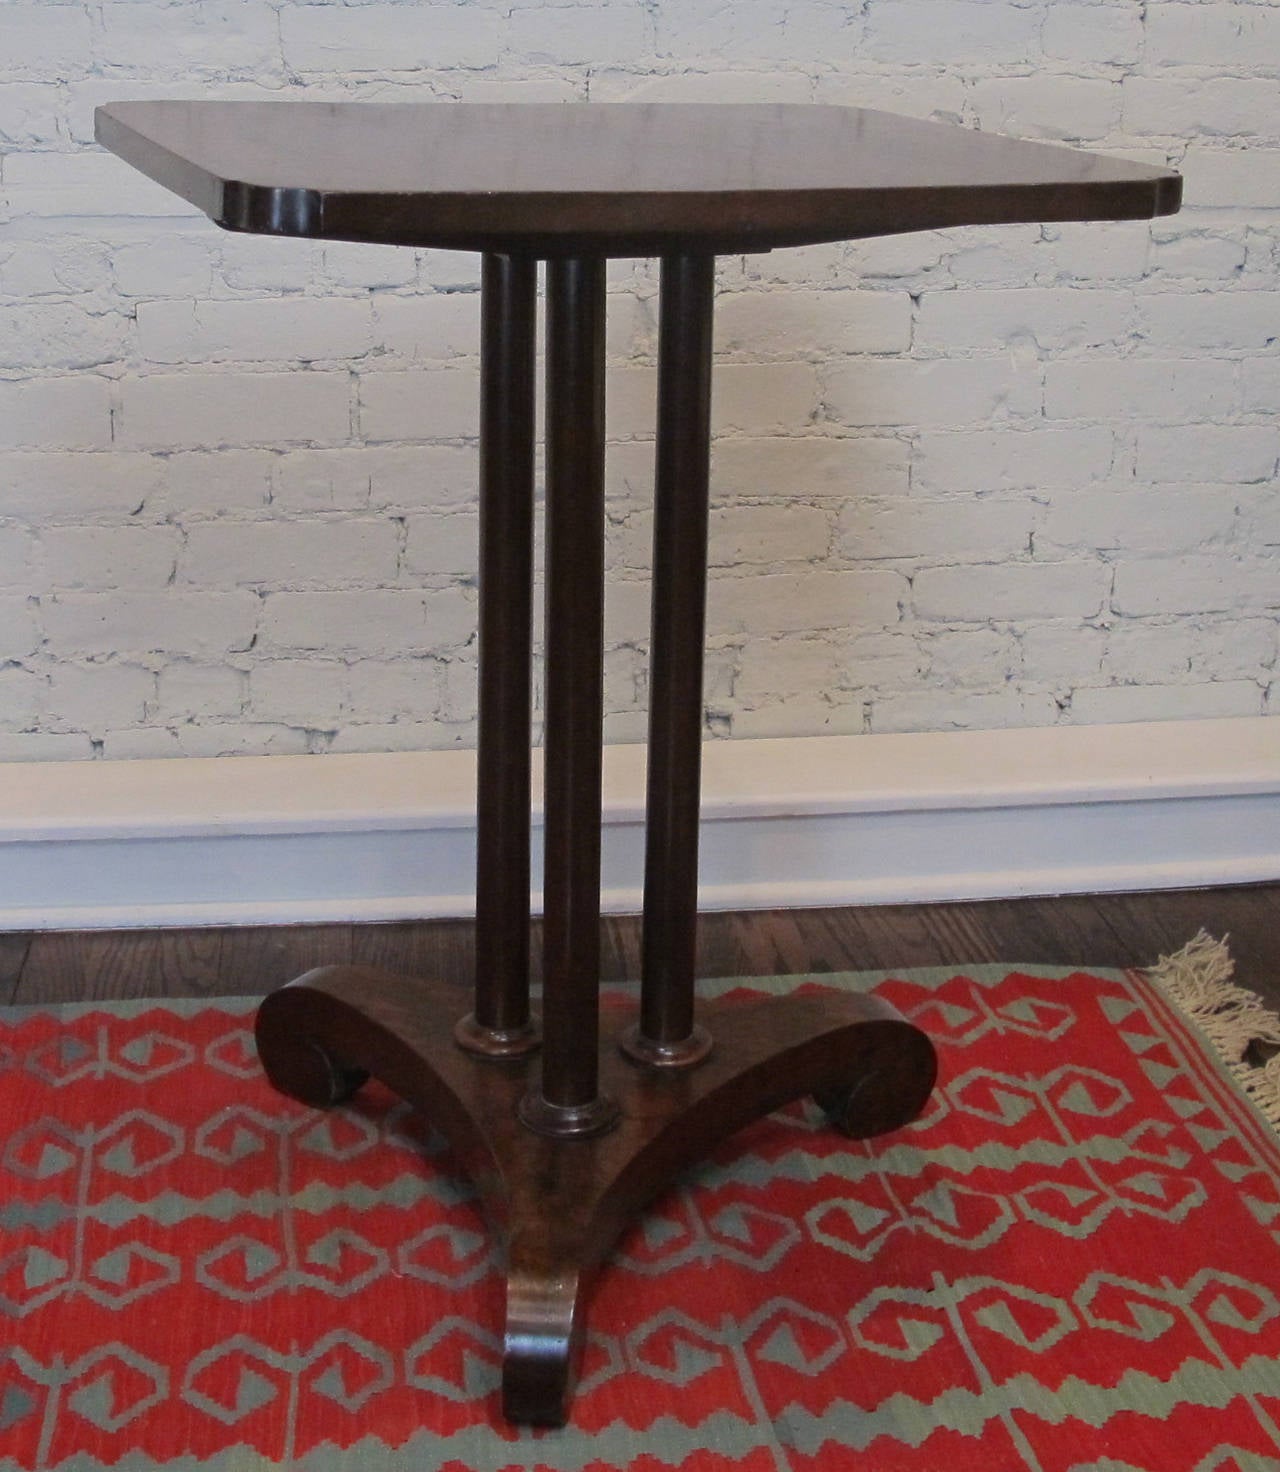 Mahogany side or tea table with veneered tripod base supporting solid mahogany columns and top. Refinished at some point and recently polished. Table height, would make a great nightstand or hall table as well.